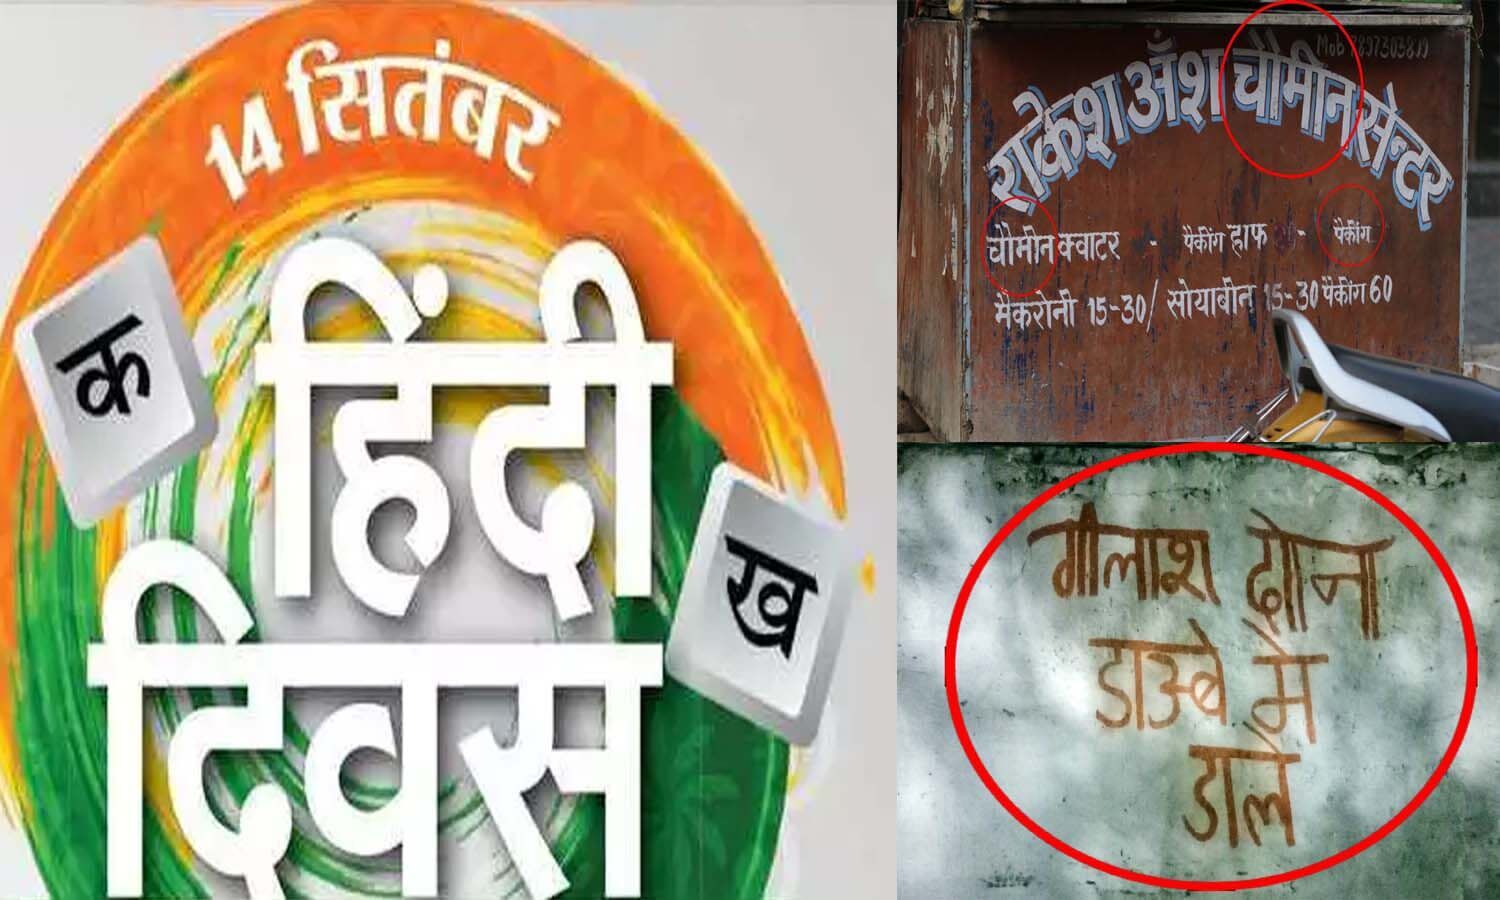 Hindi Divas 2022: Hindi is our mother tongue, not just language, see how it is being ridiculed in pictures